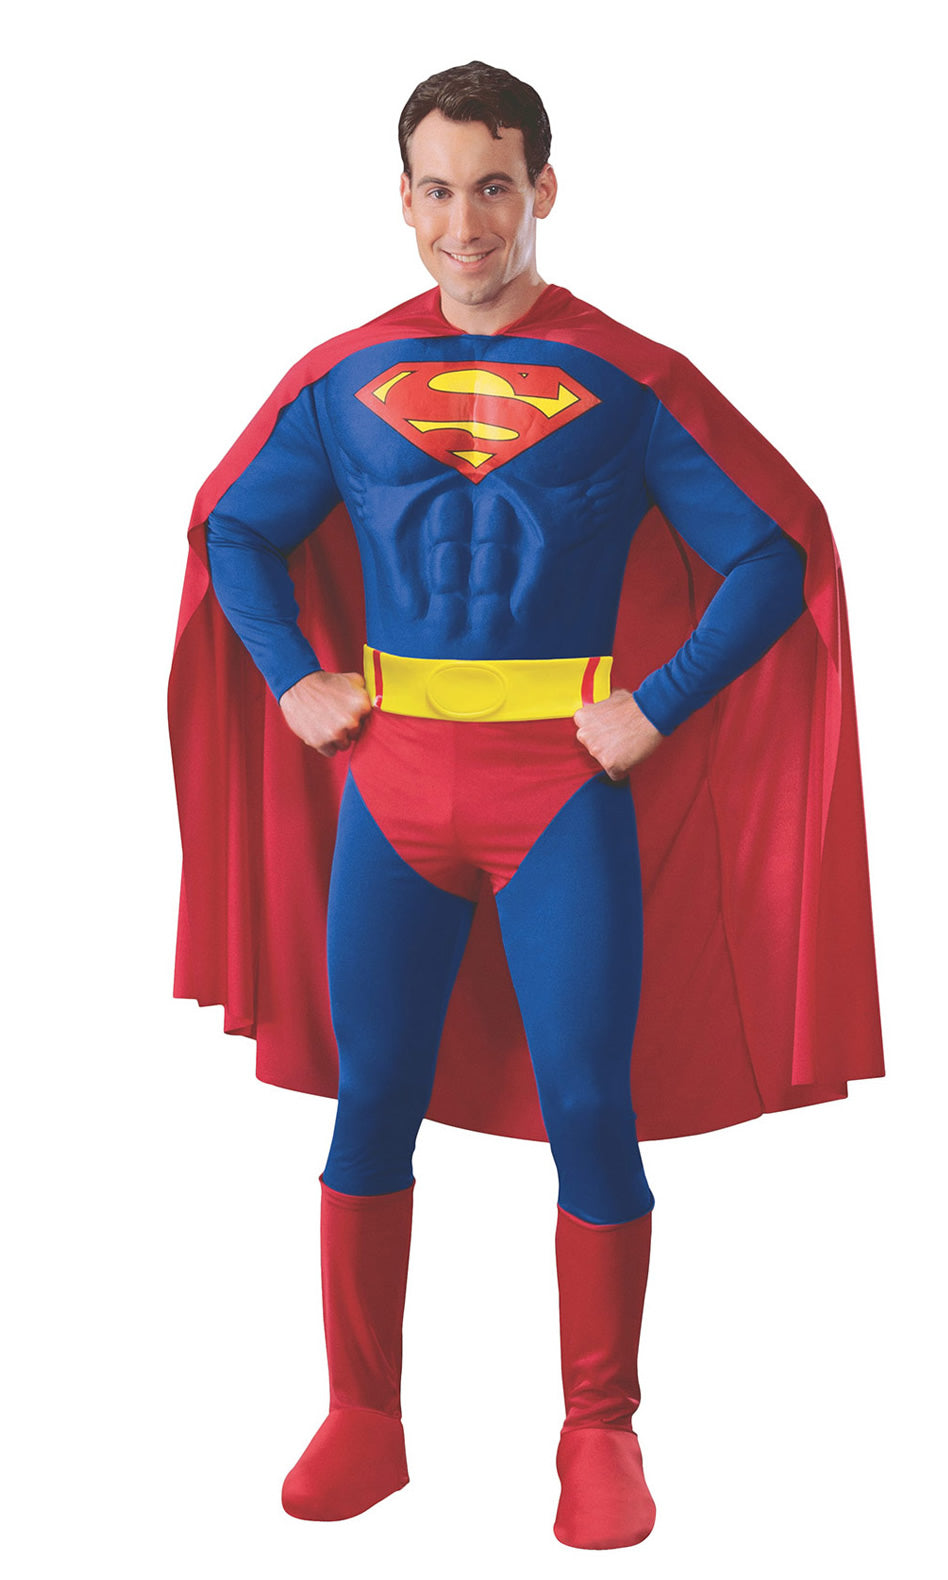 Superman costume with cape and muscle chest